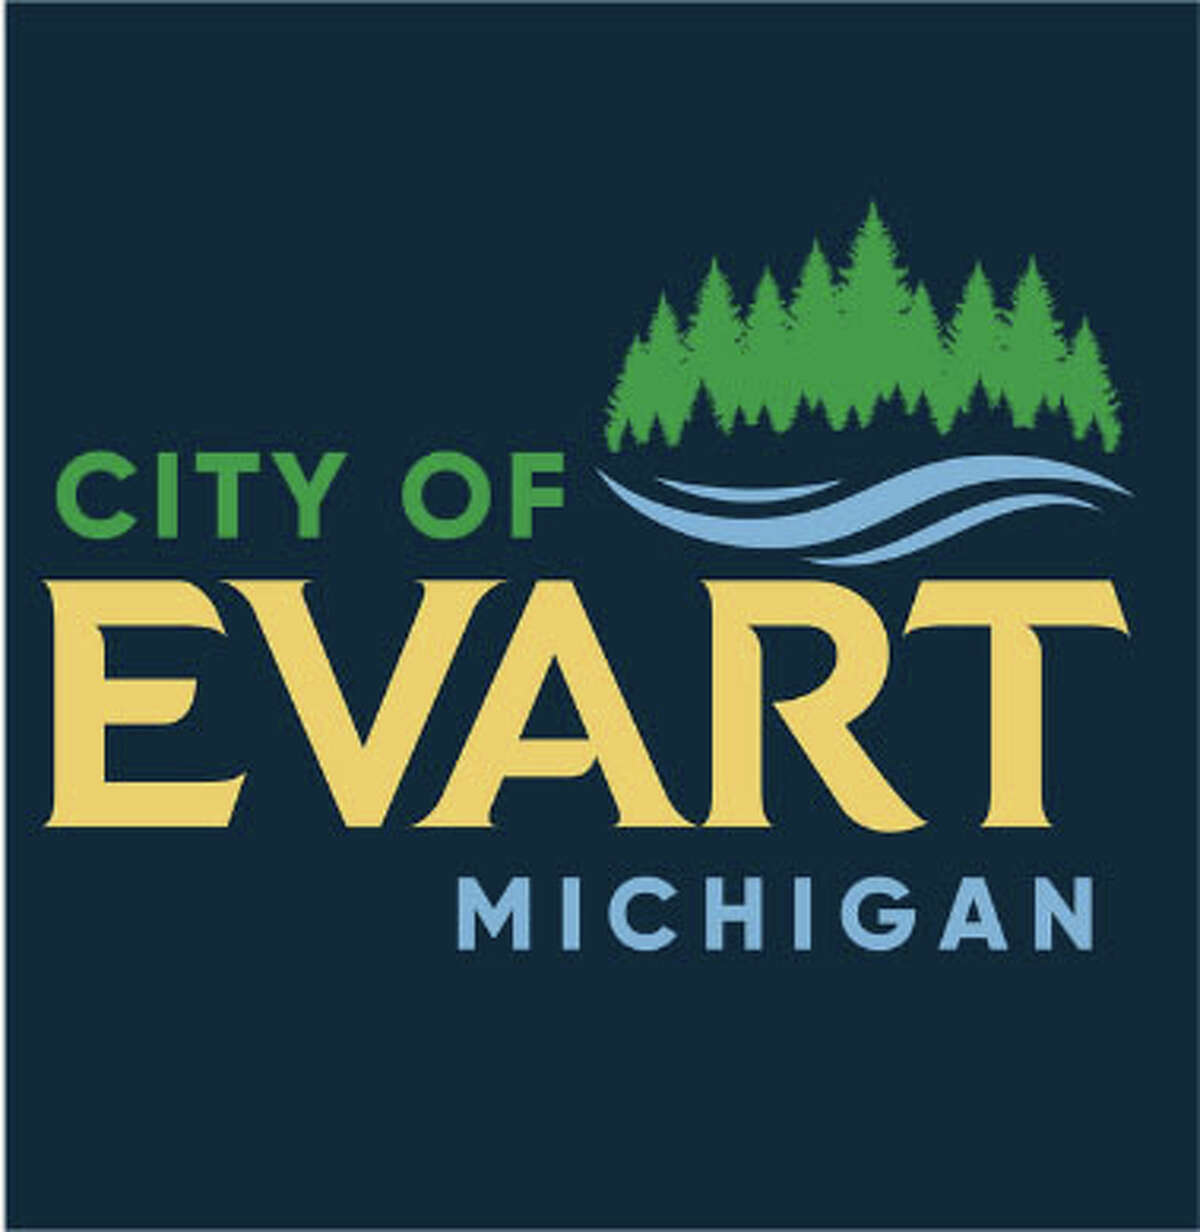 The Evart city council is working to change the city charter to make the city clerk an appointed position, rather than an elected position. Decision may come before voters in August.